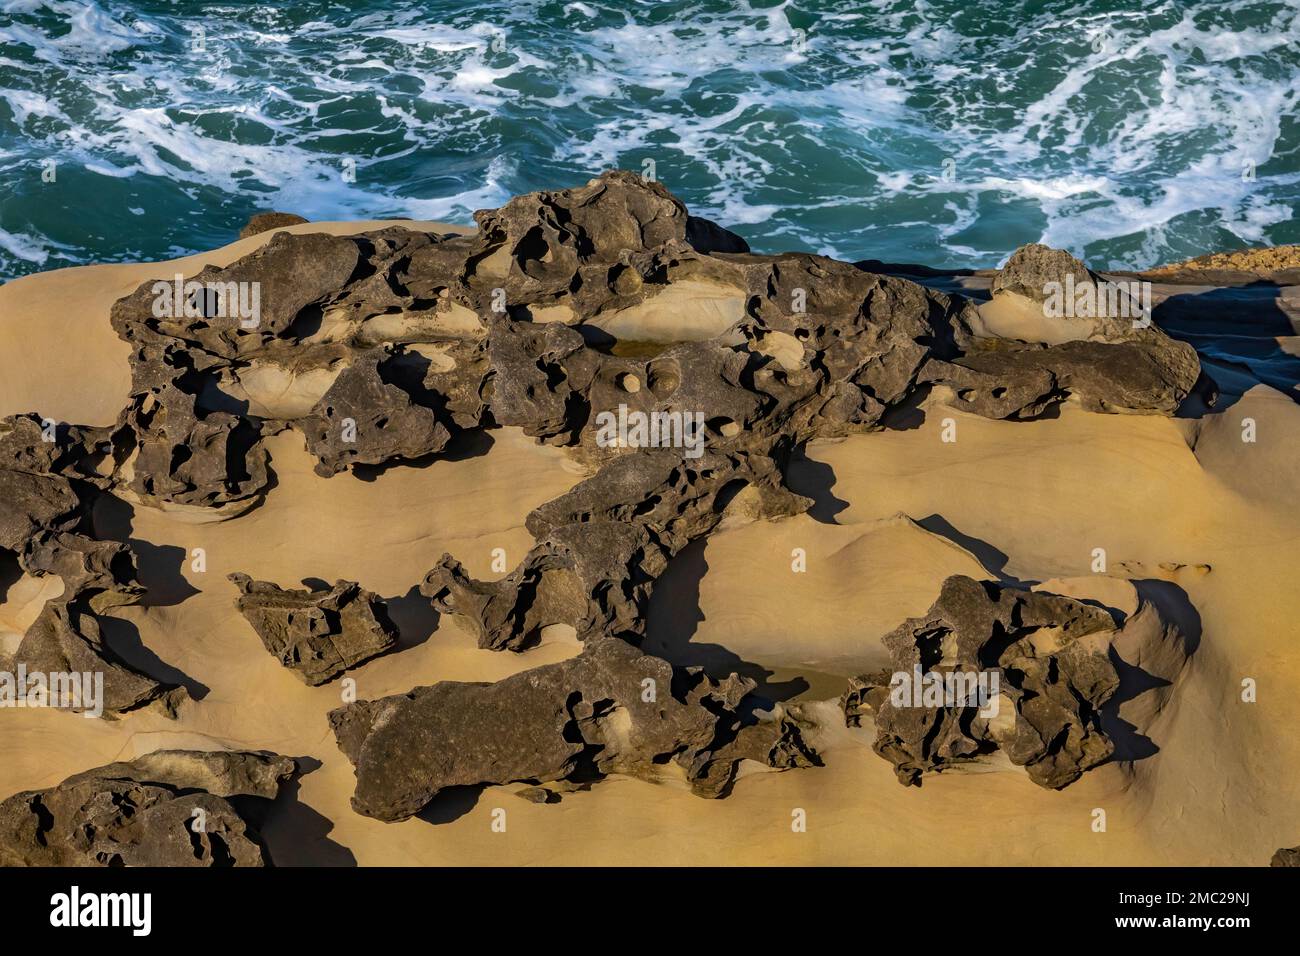 Honeycomb weathering and concretions on the sandstone at Shore Acres State Park on the Oregon Coast, USA Stock Photo